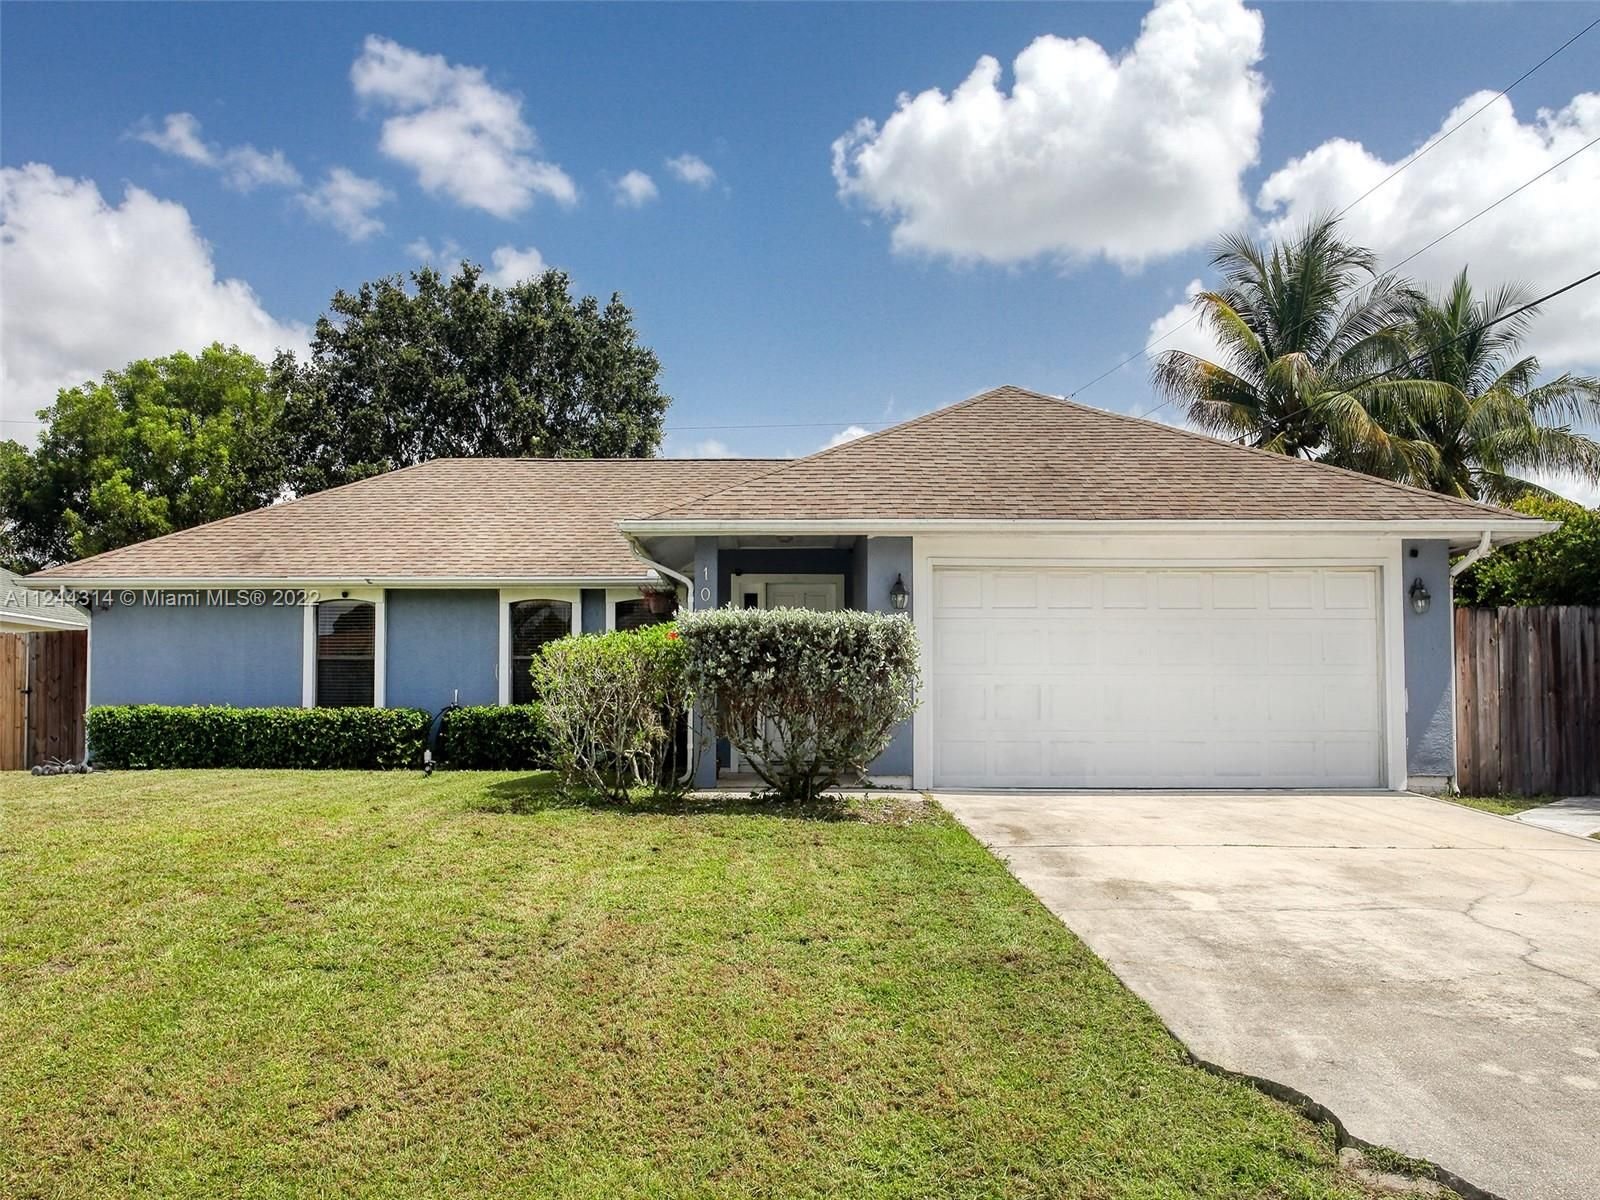 Real estate property located at 1005 Mataro Ave, St Lucie County, Port St. Lucie, FL